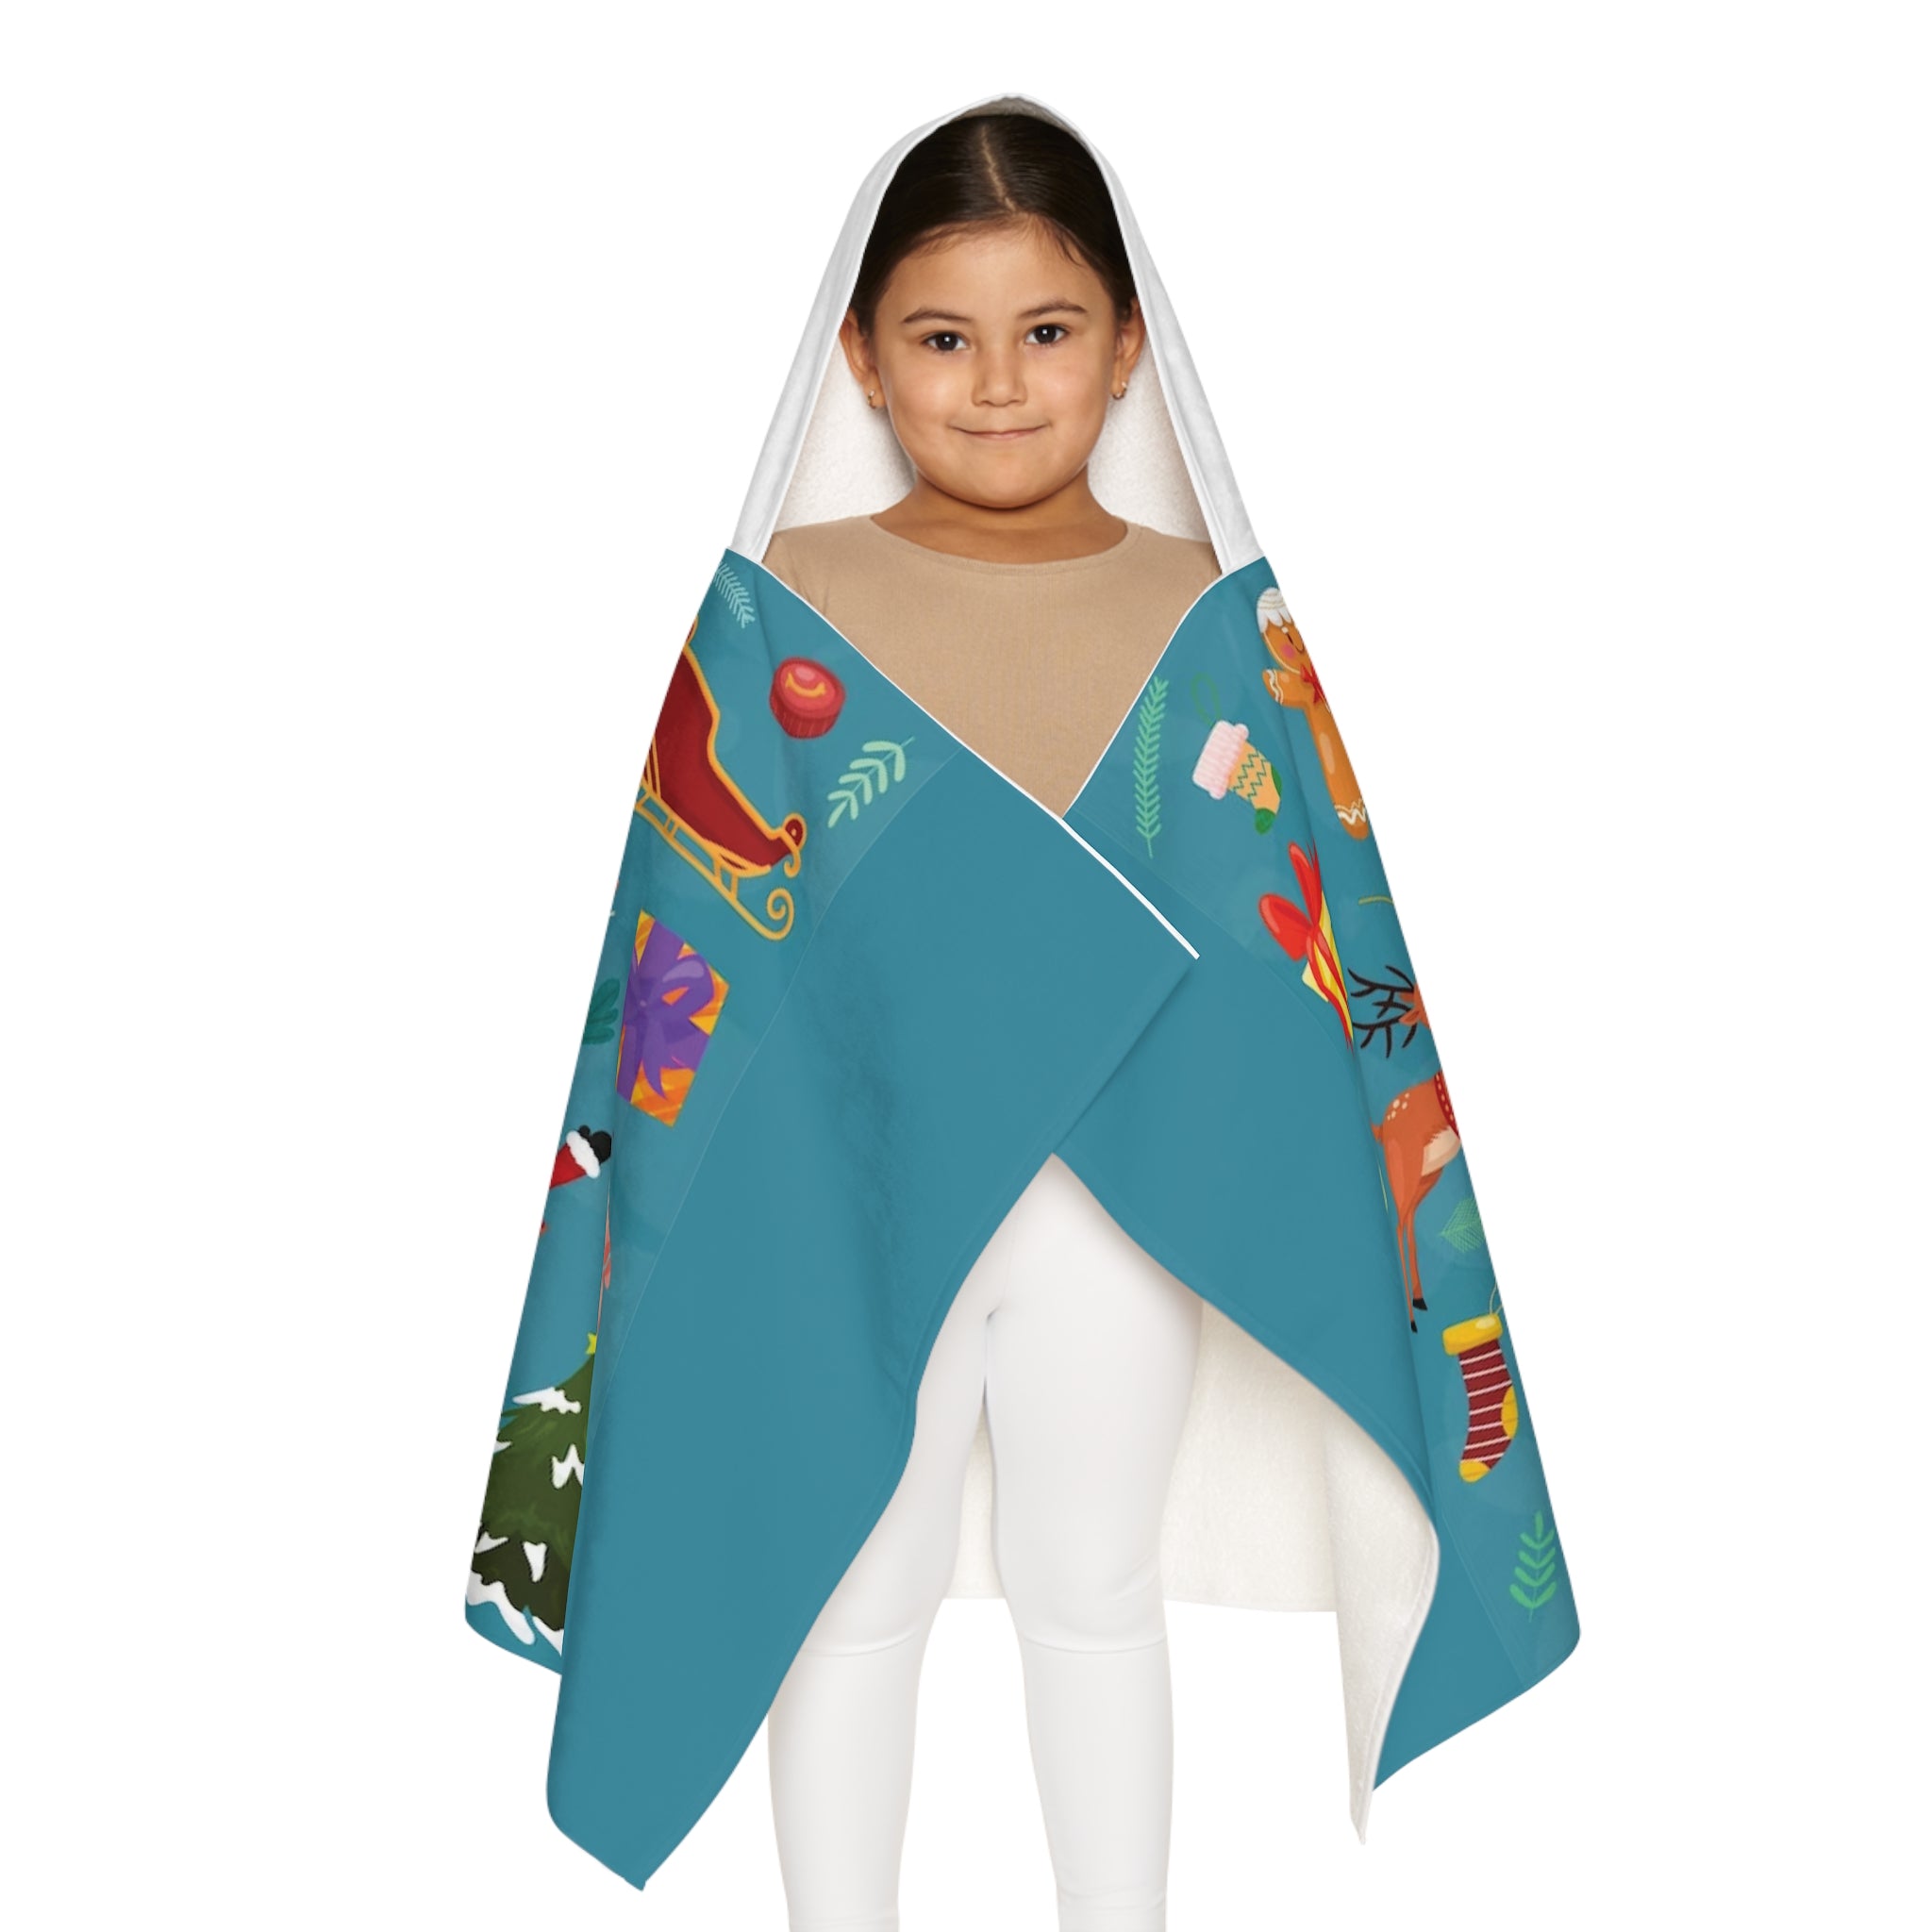 Christmas Youth Hooded Towel, Blue